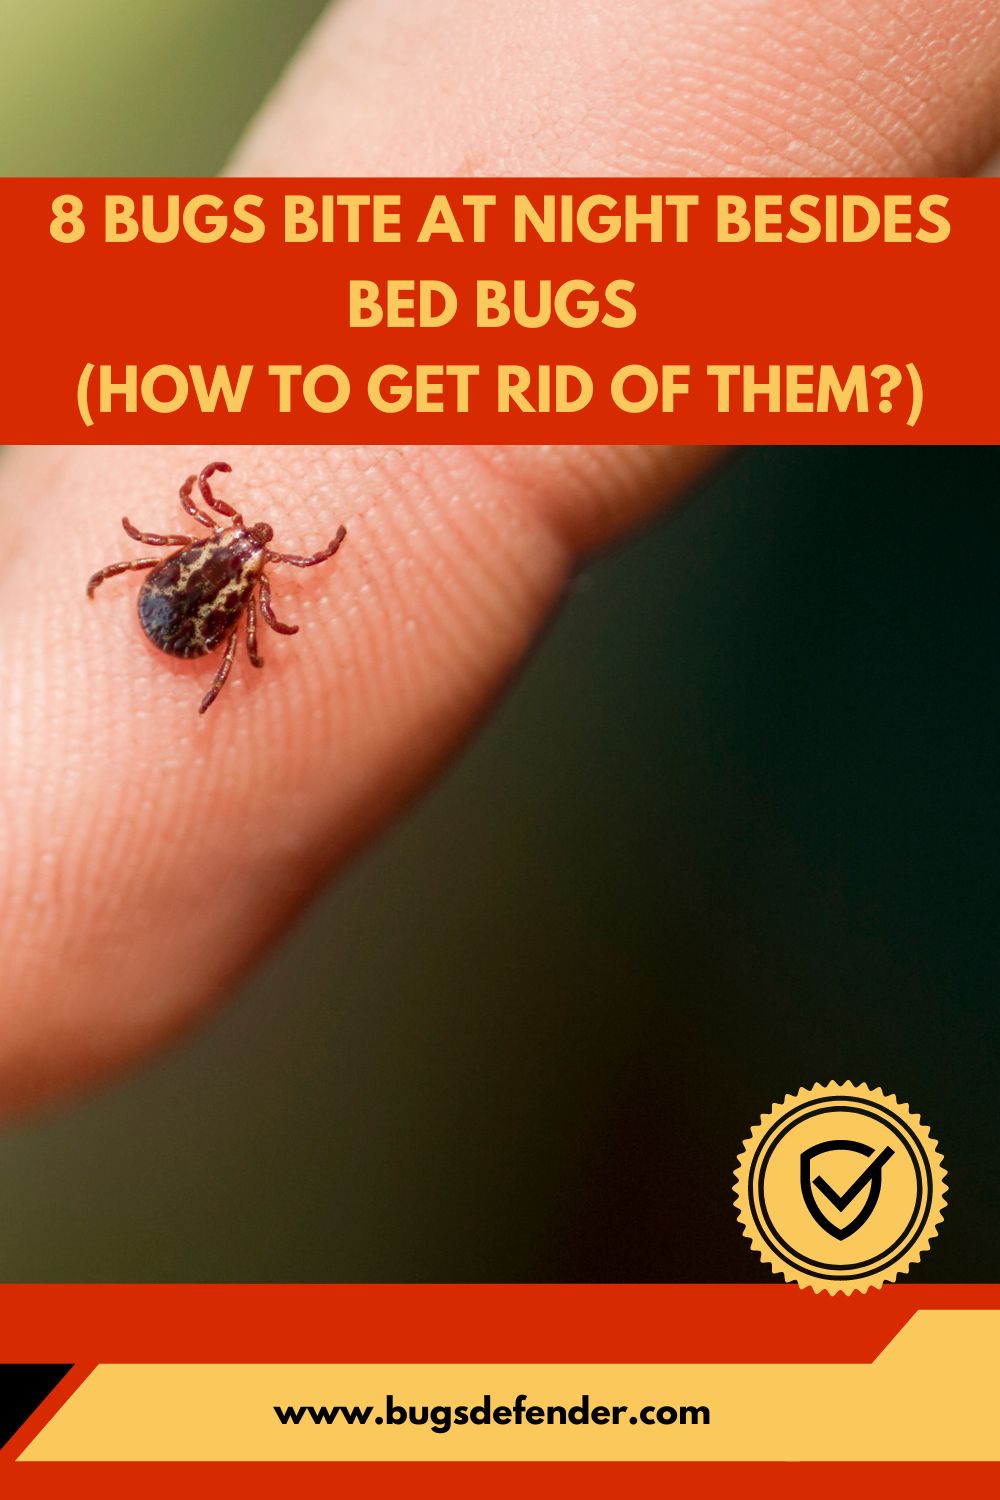 8 Bugs Bite at Night Besides Bed Bugs pin2